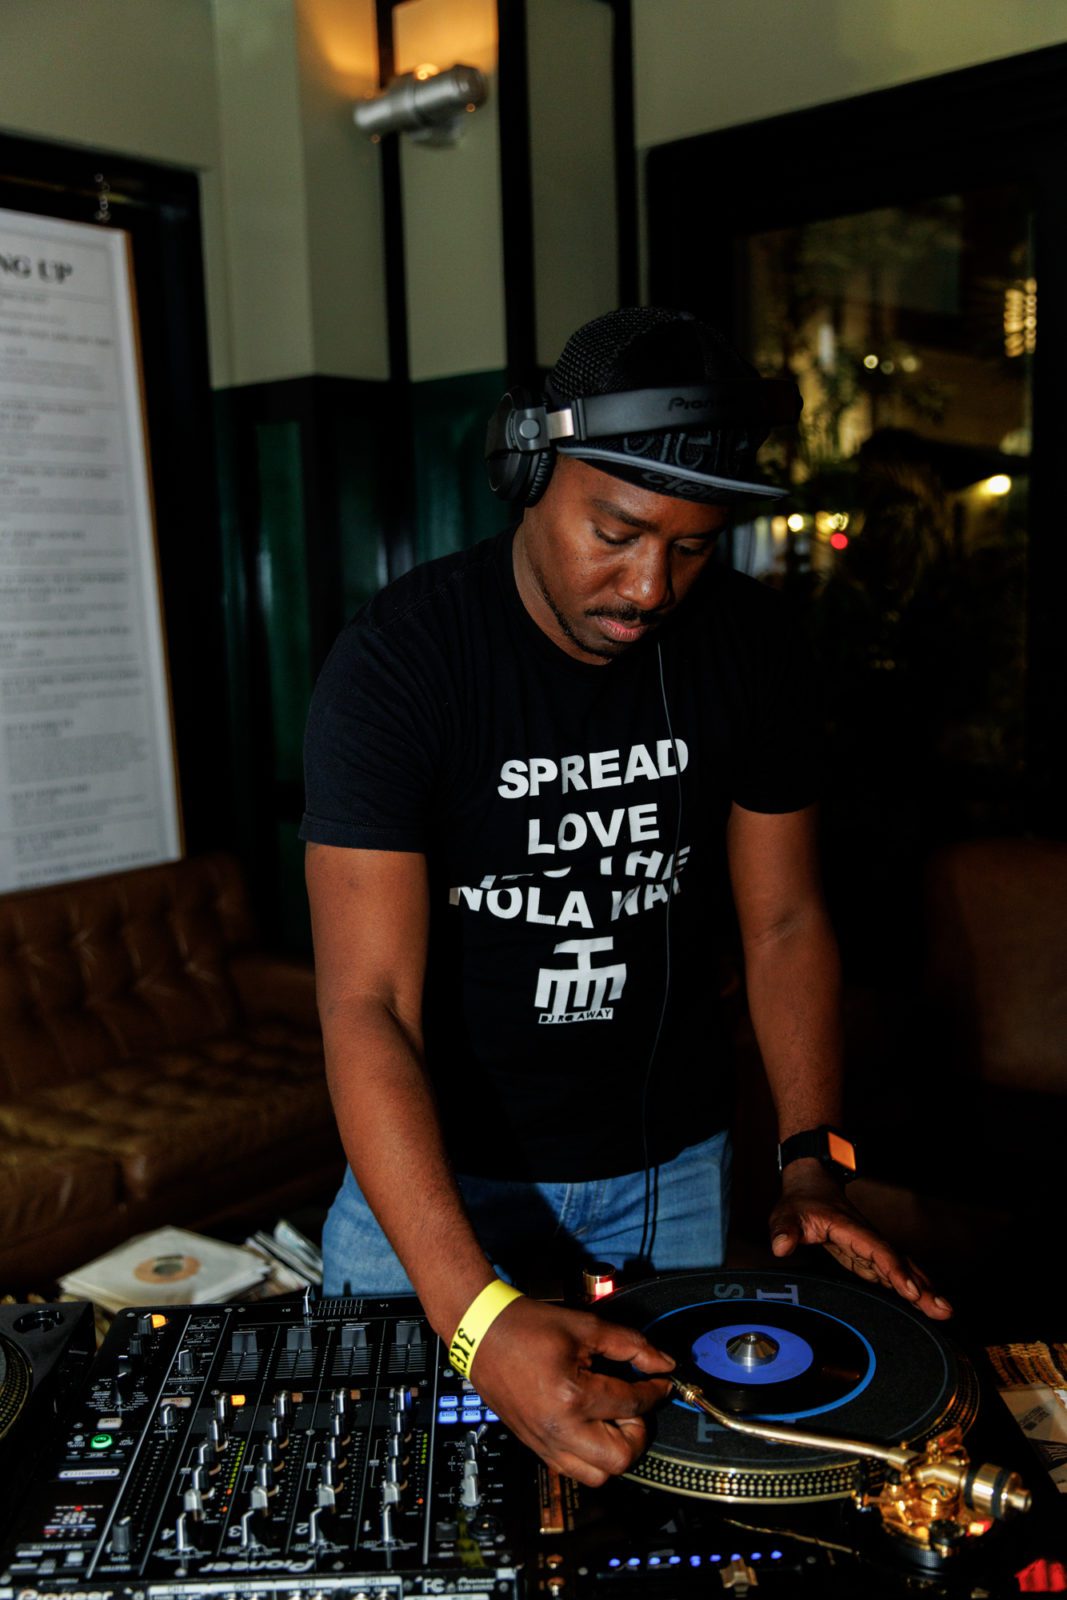 person wearing headset spinning on turntables